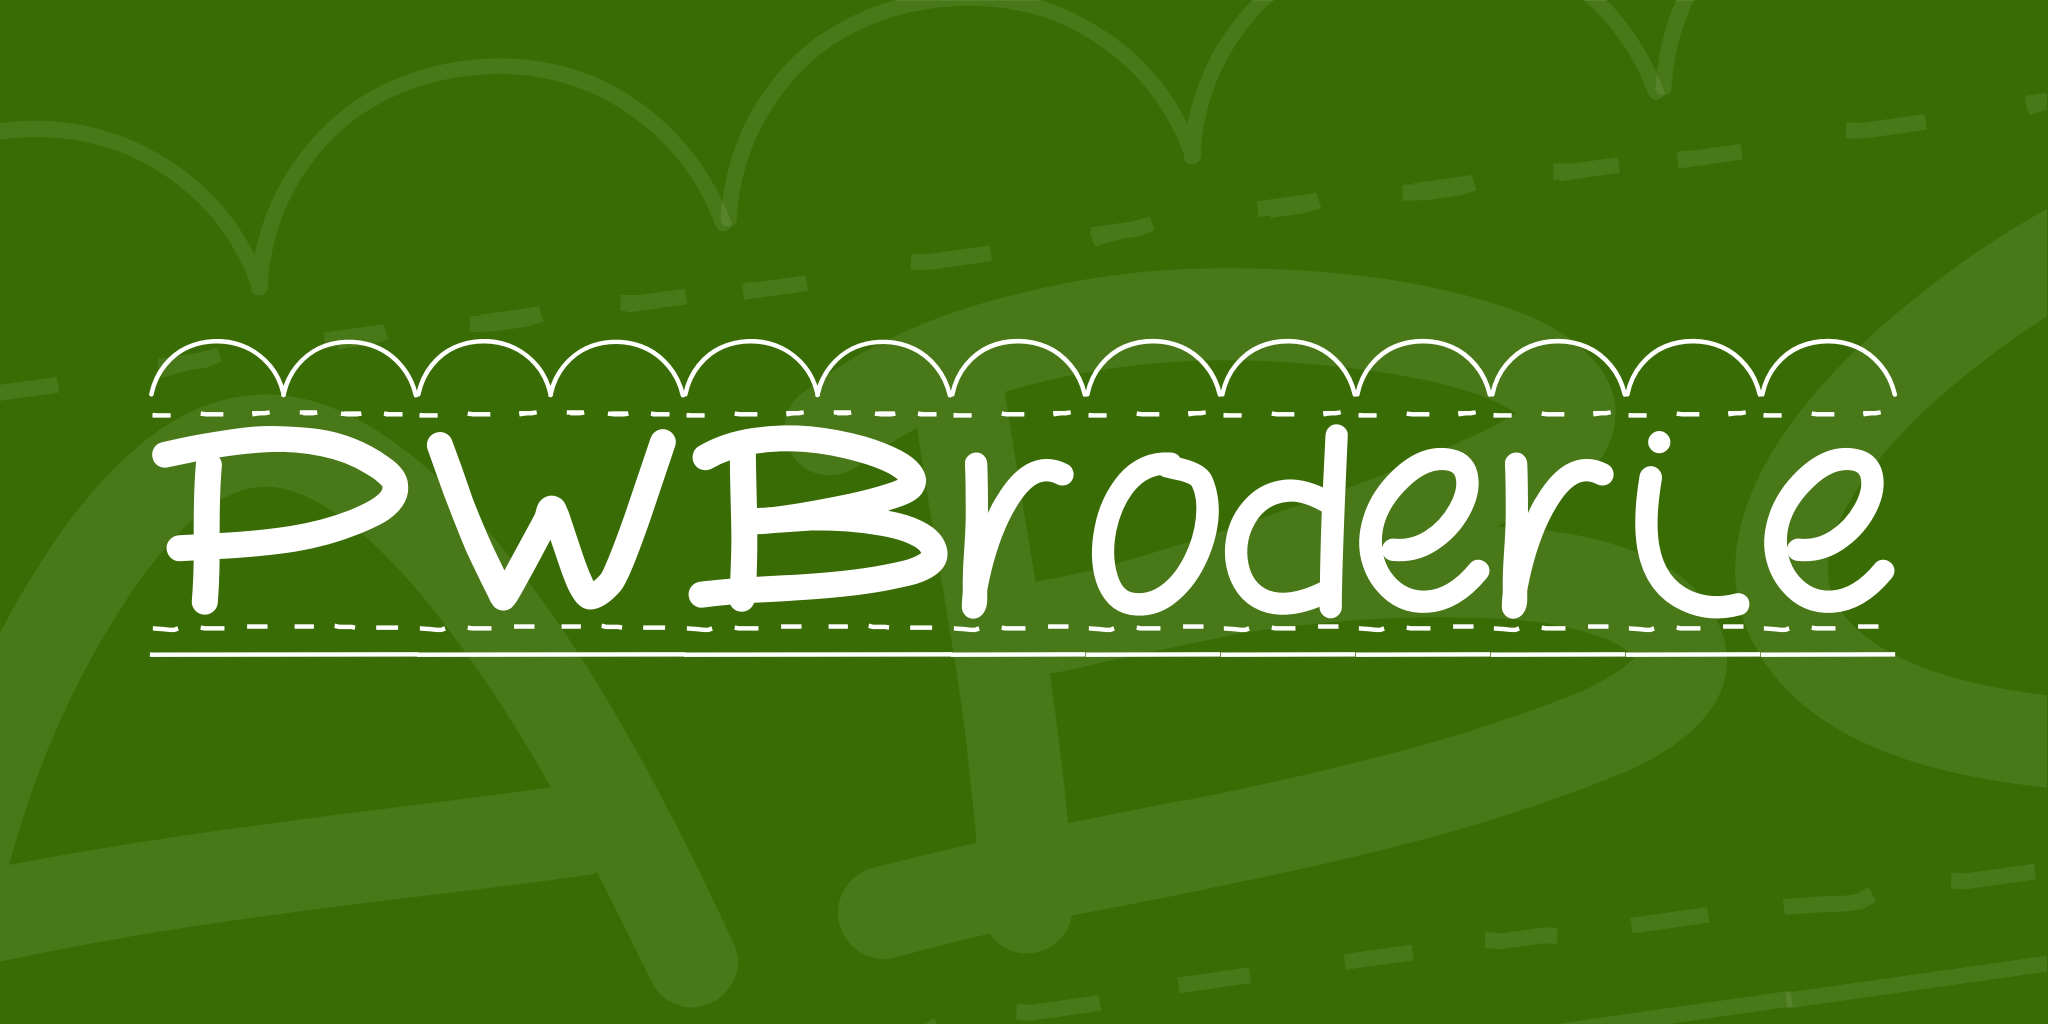 Pw Broderie